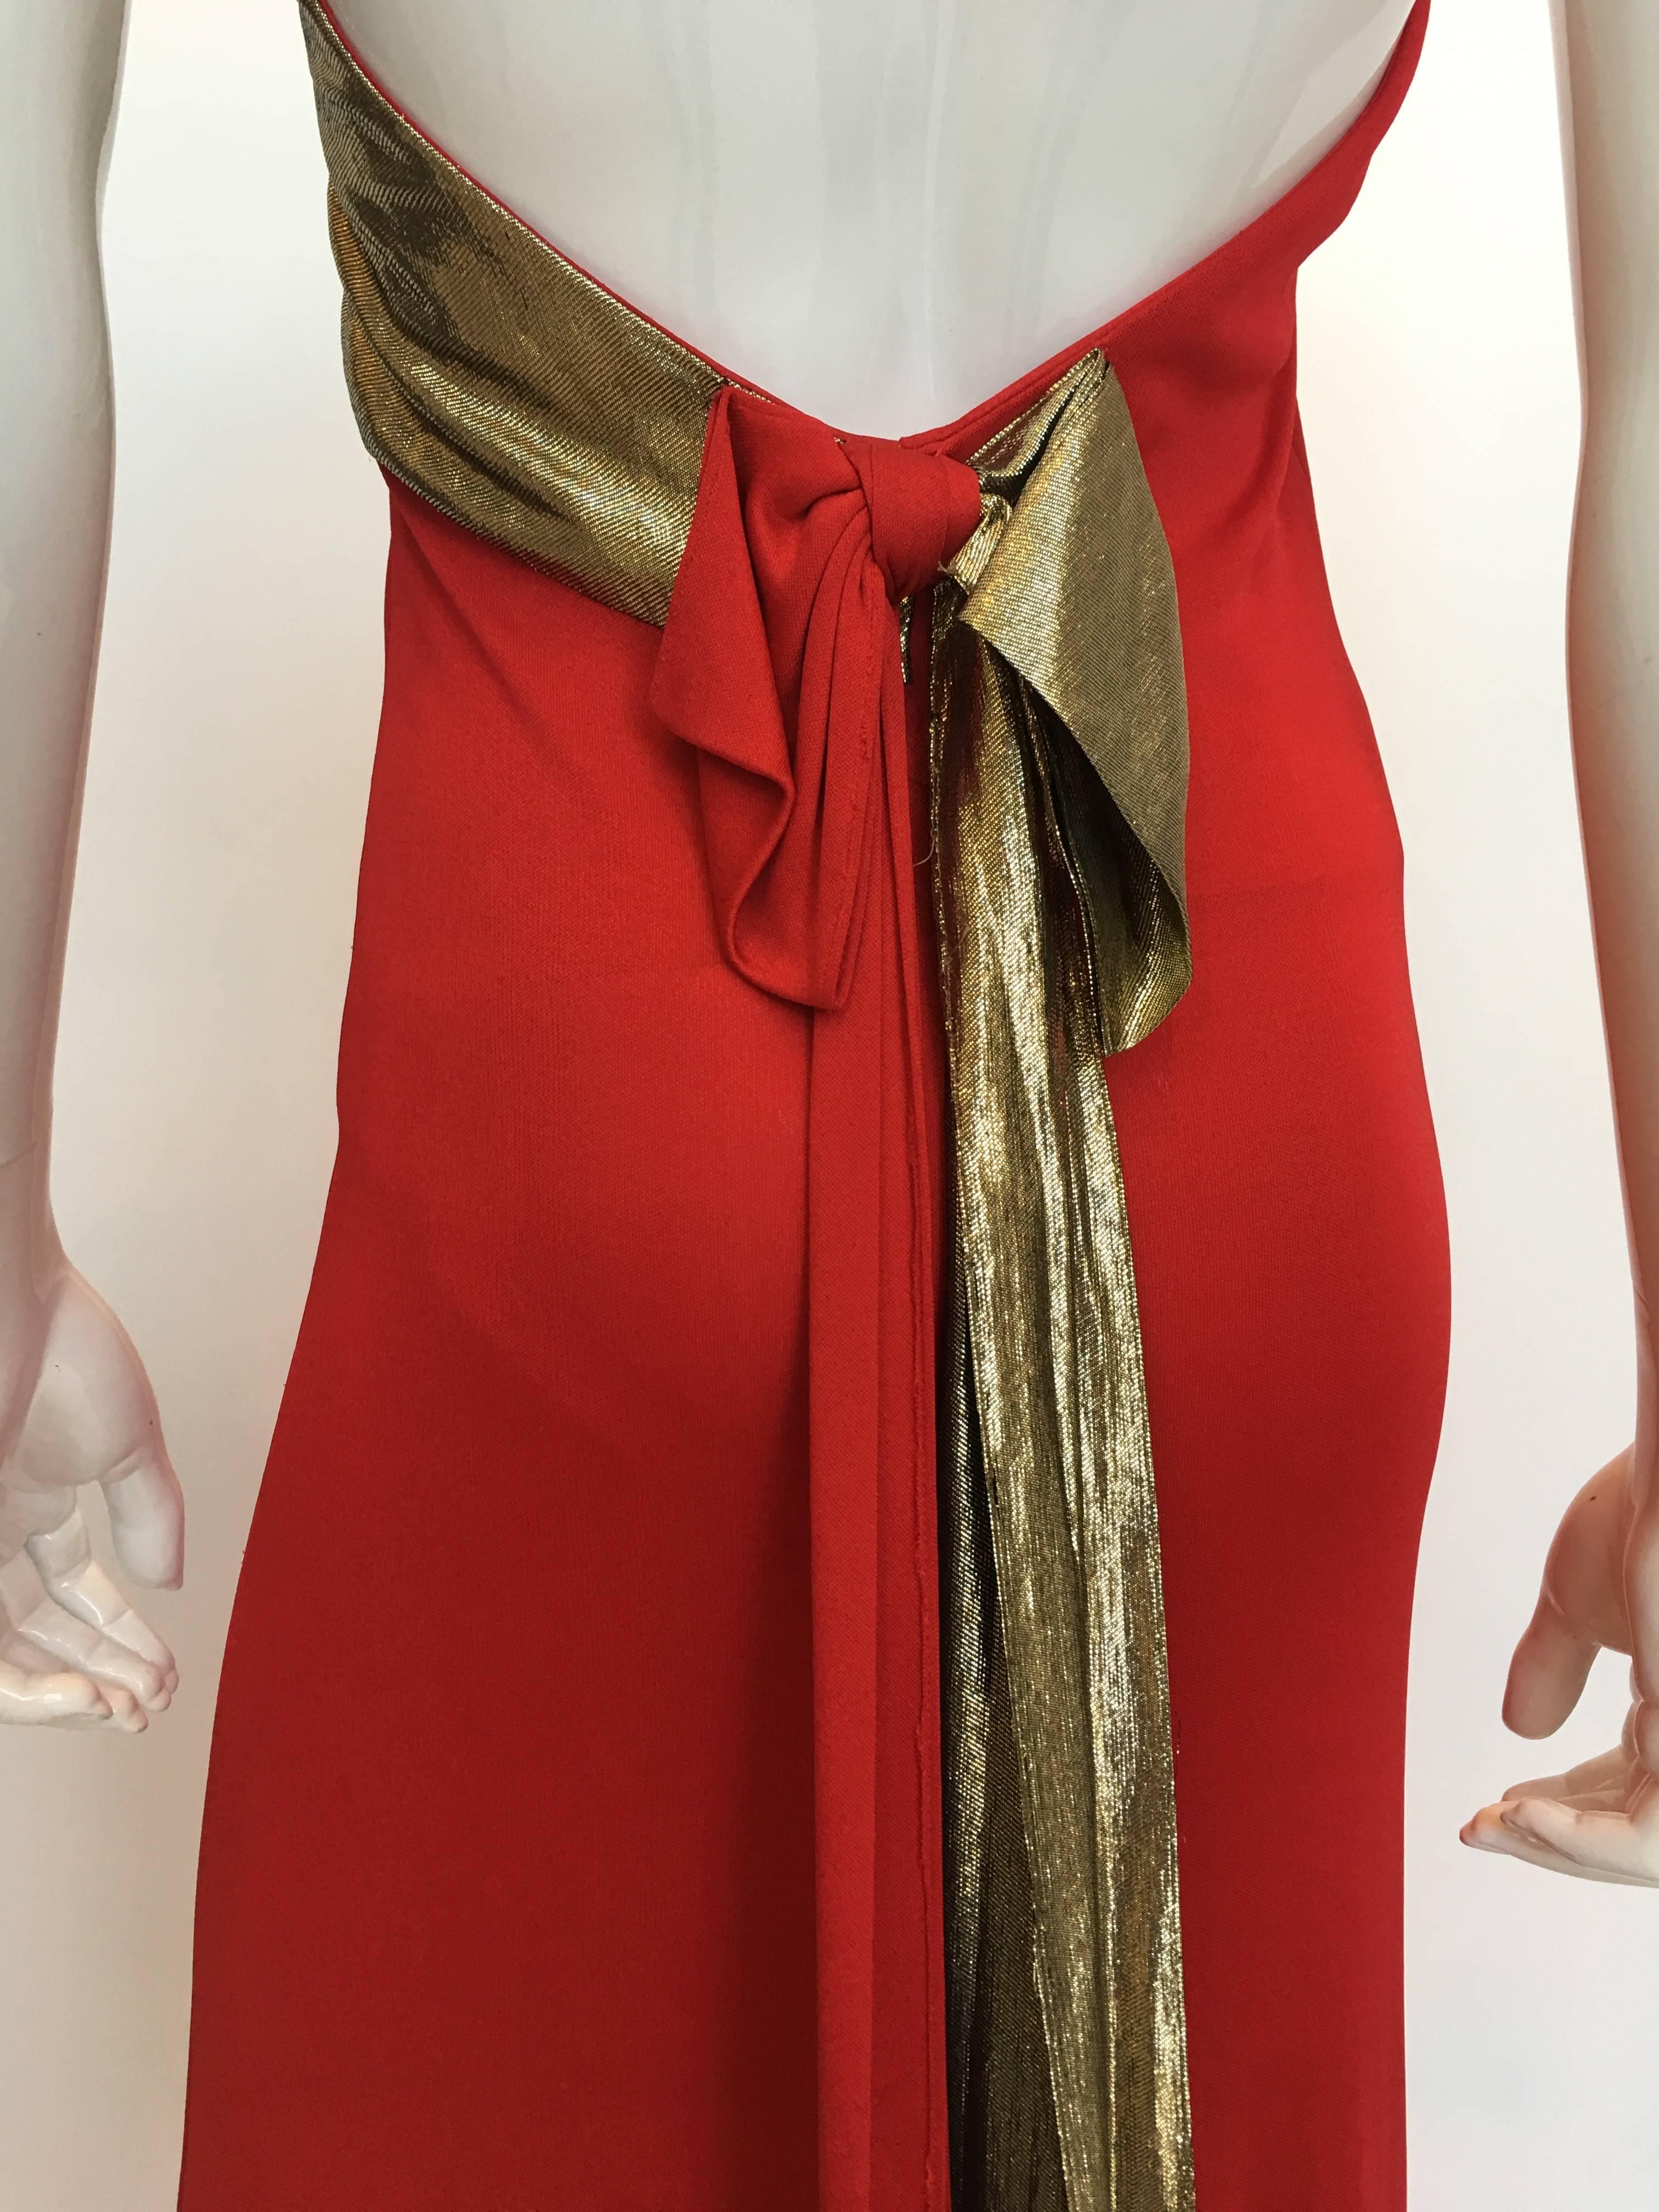 Giorgio Sant'Angelo 1970's Red Jersey Halter Dress For Sale 4